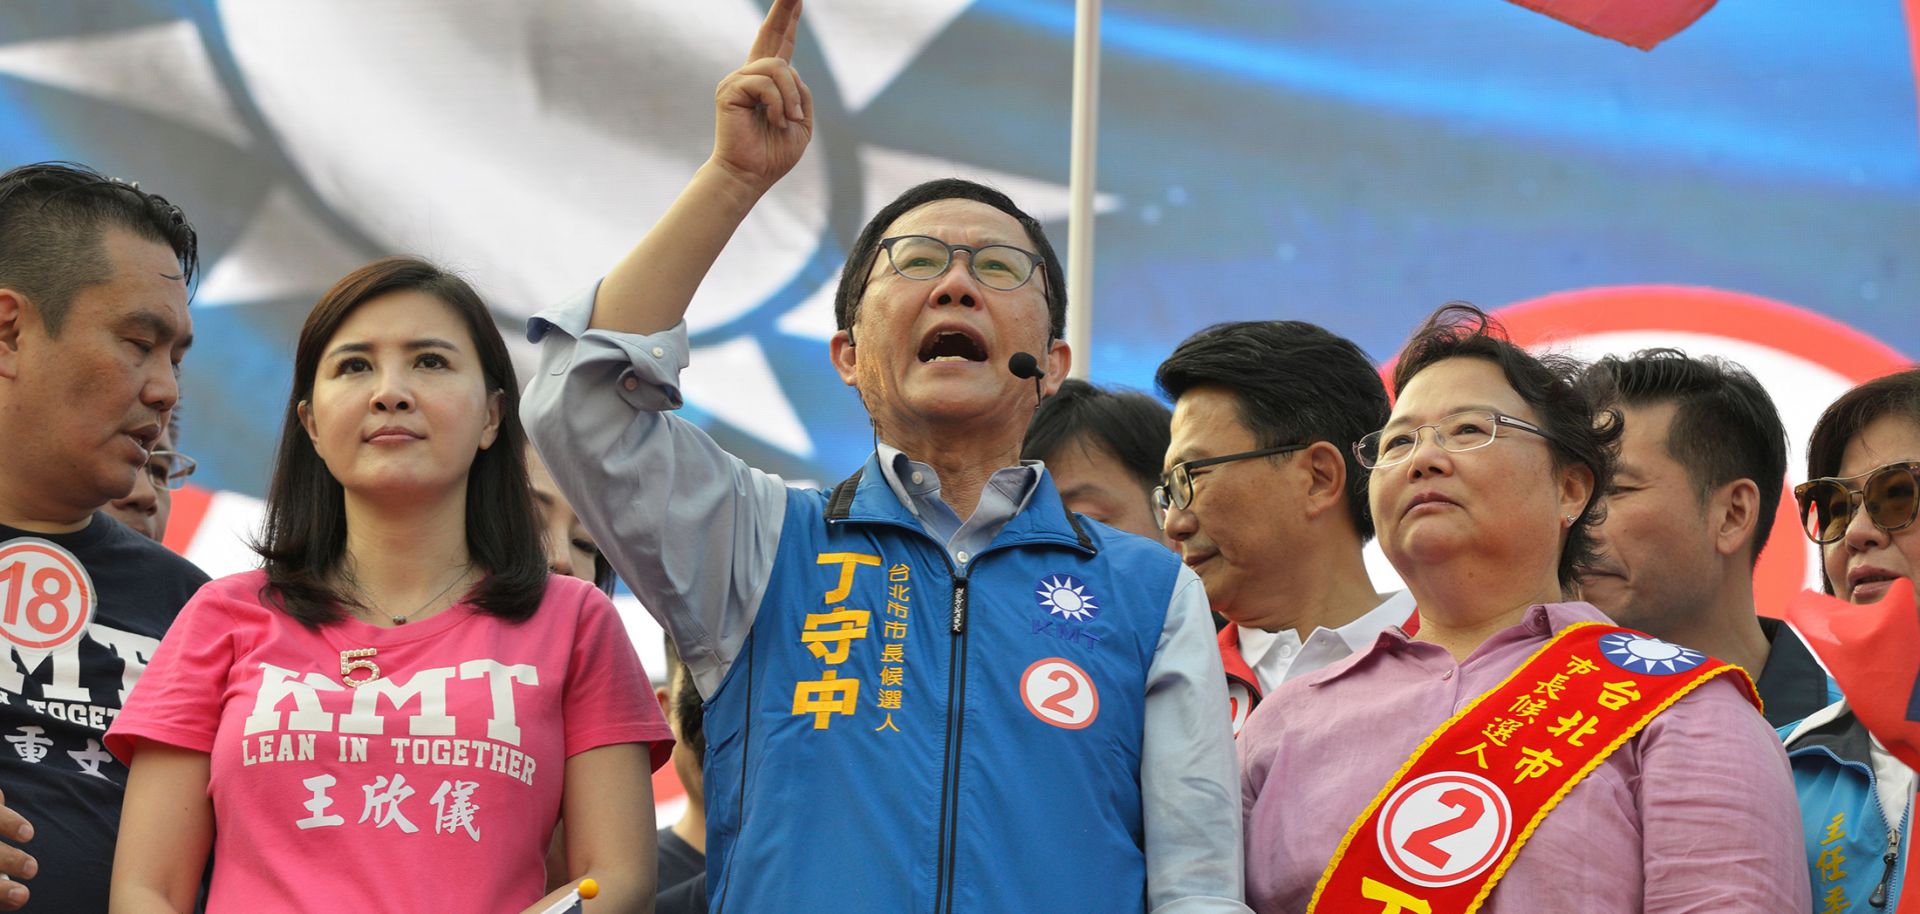 Kuomintang candidate Ting Shou-chung campaigns for the post of mayor of Taipei on Nov. 11, 2018.